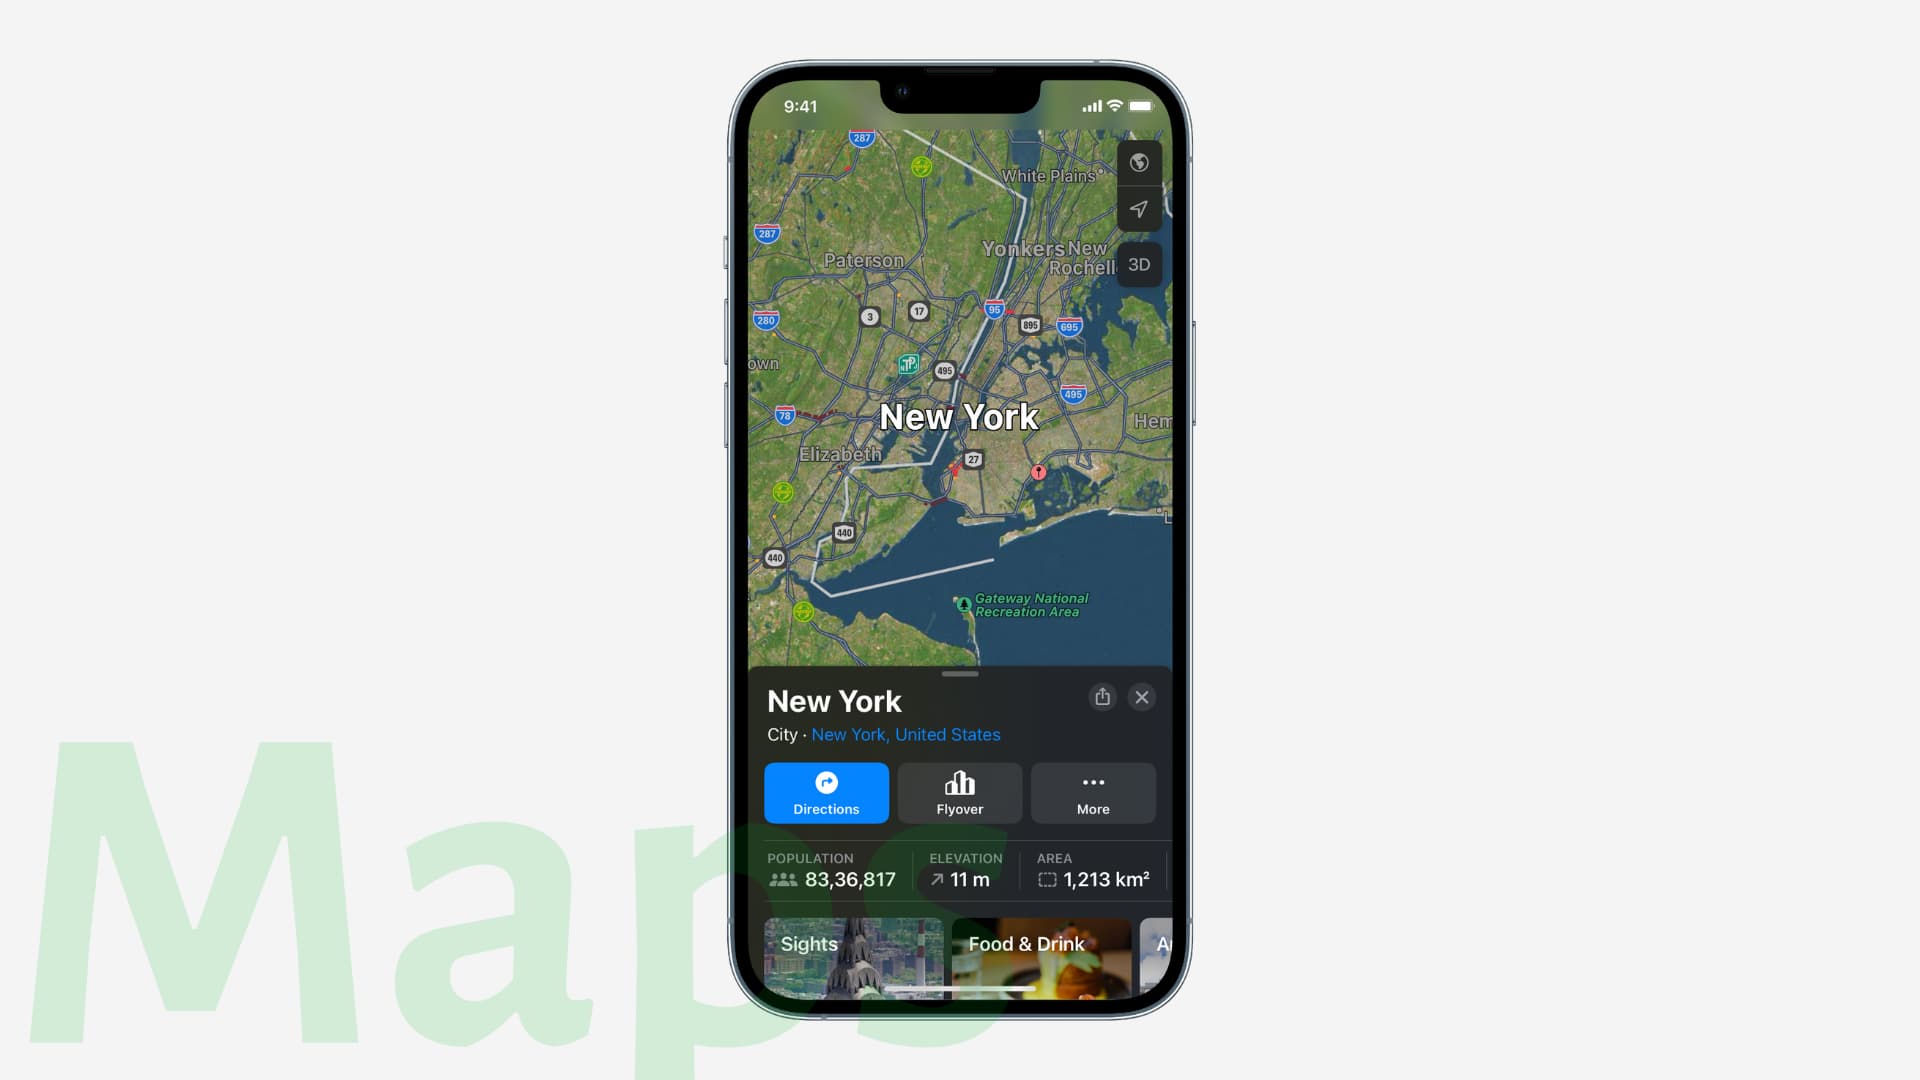 Changes to Maps in iOS 16